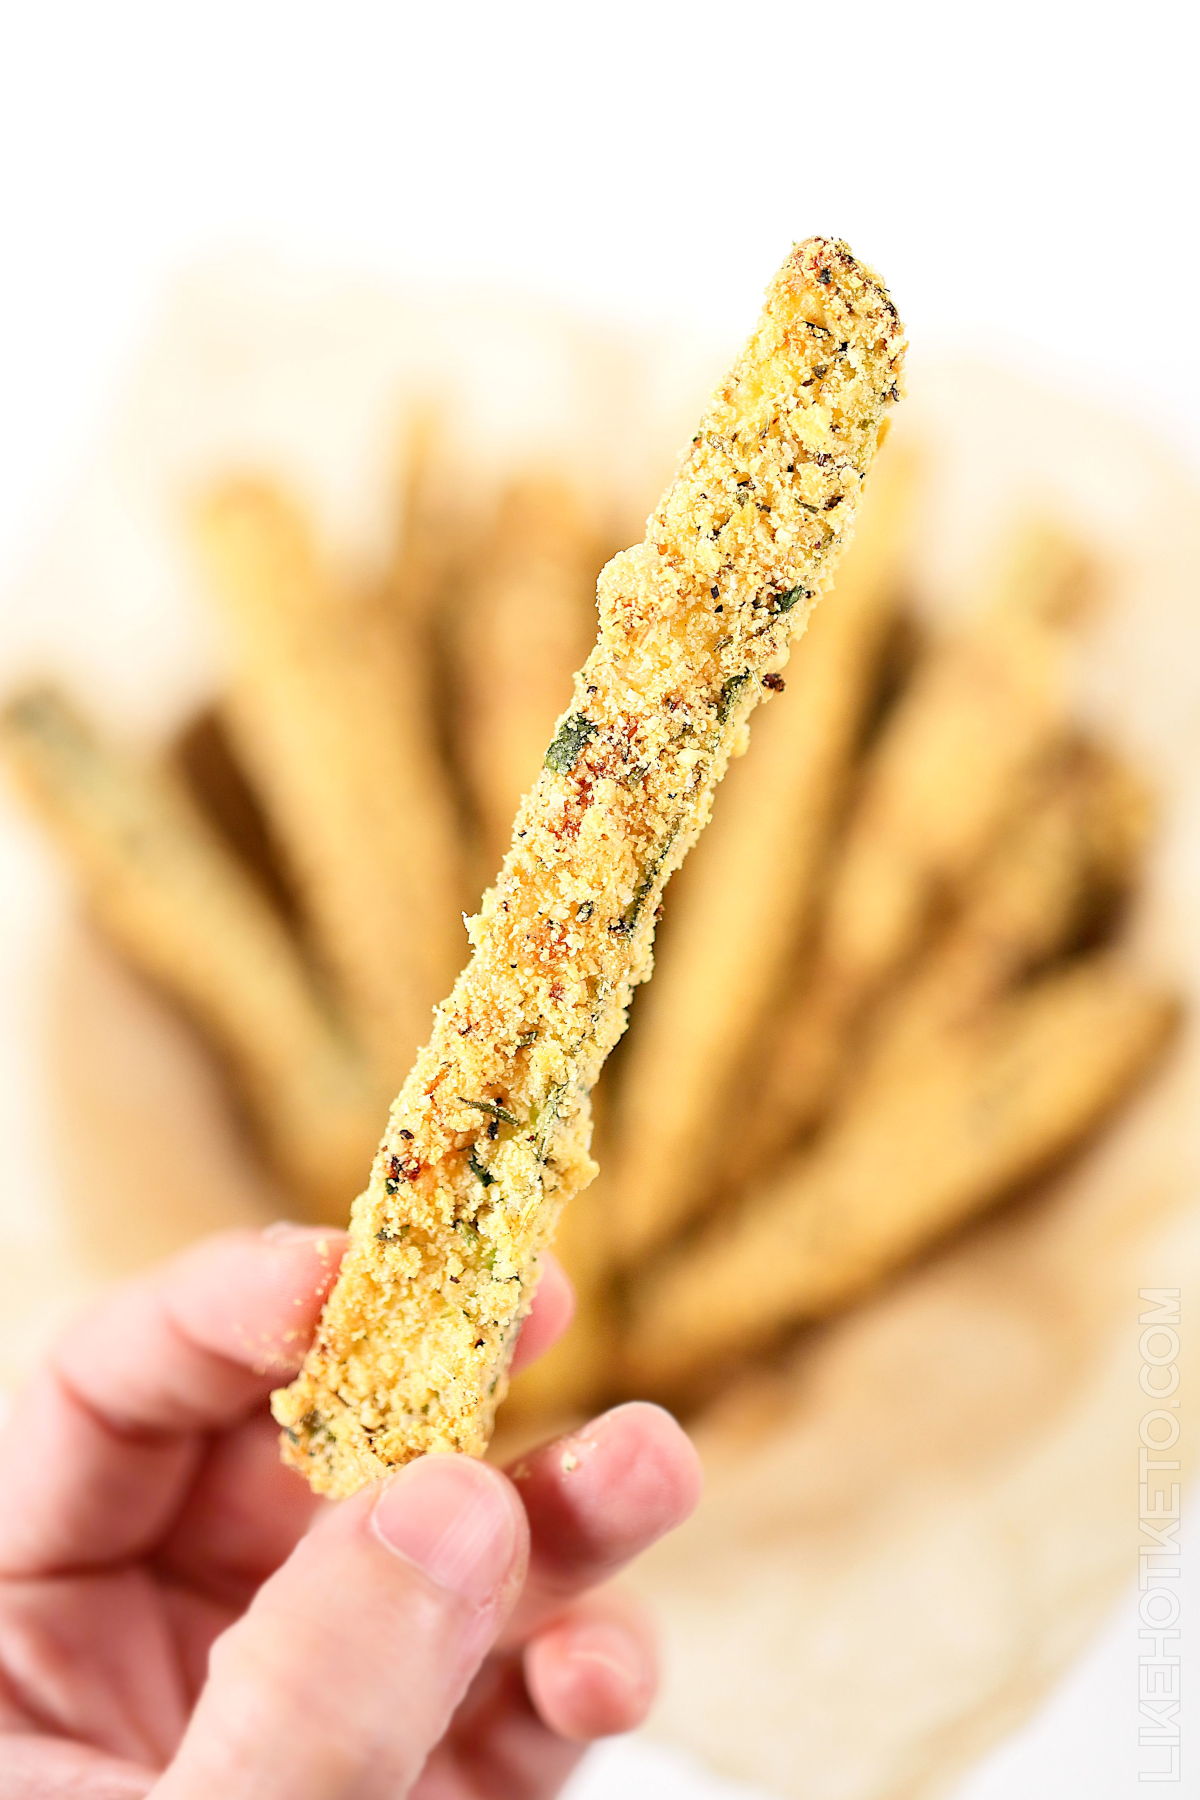 A golden crisp zucchini fry with low-carb panko and Parmesan breading.